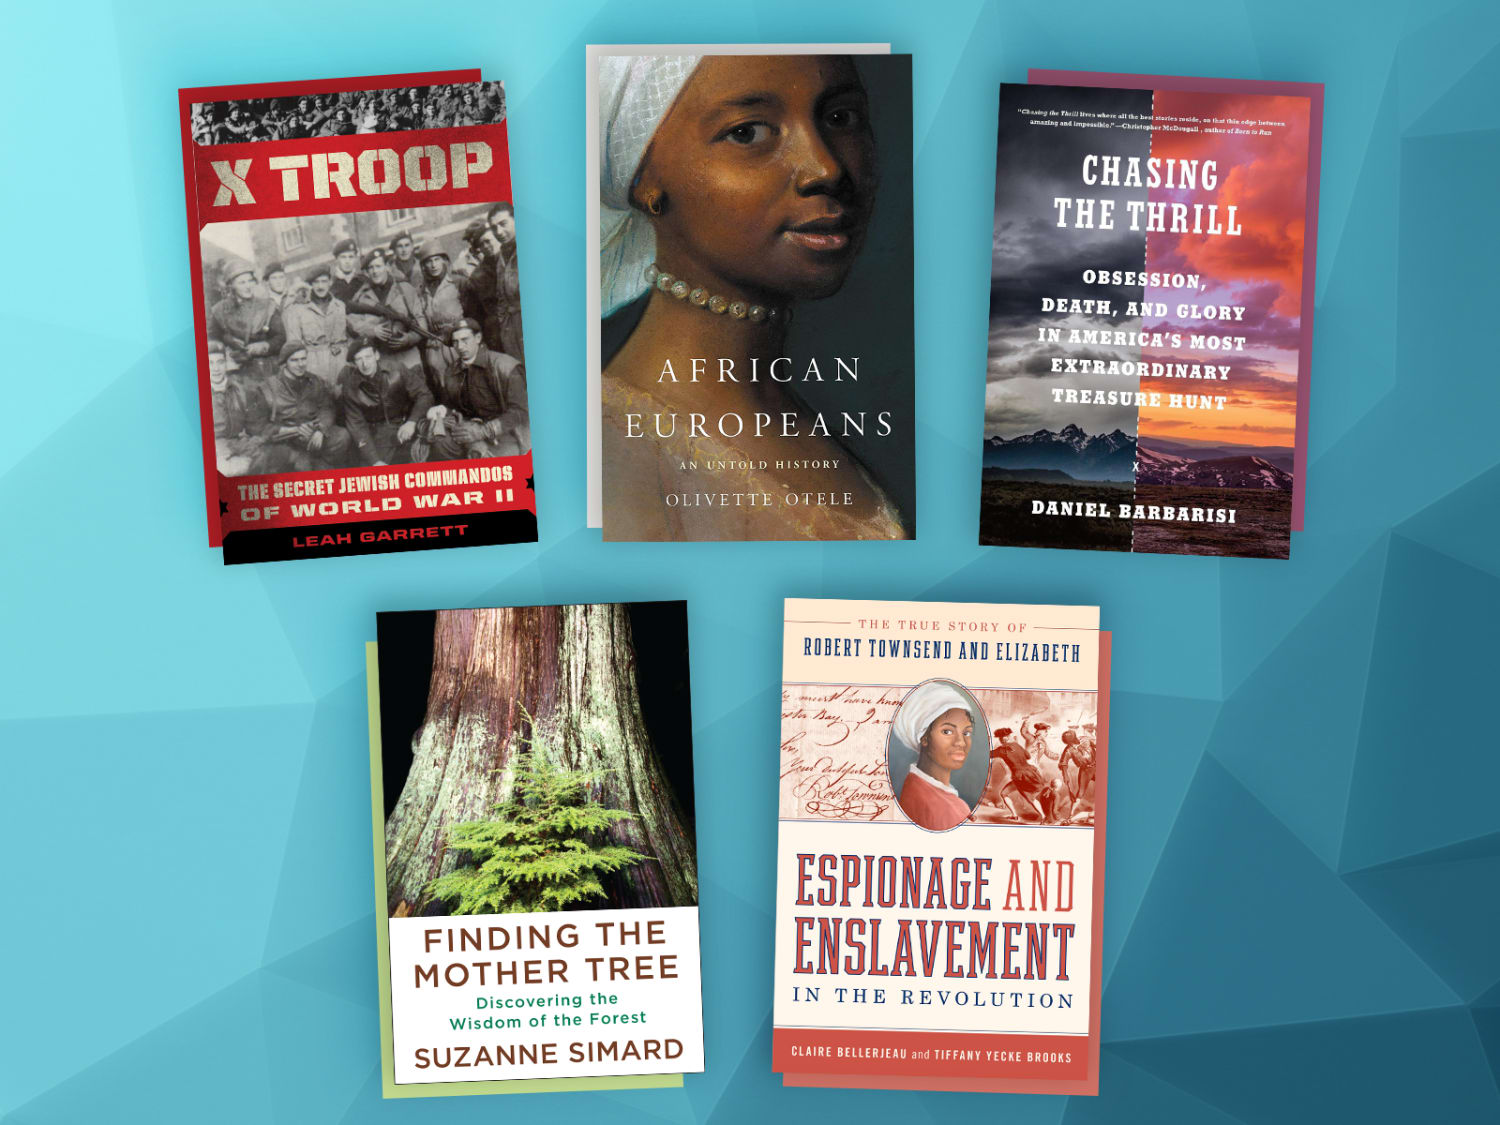 African Europeans, Jewish Commandos of WWII and Other New Books to Read